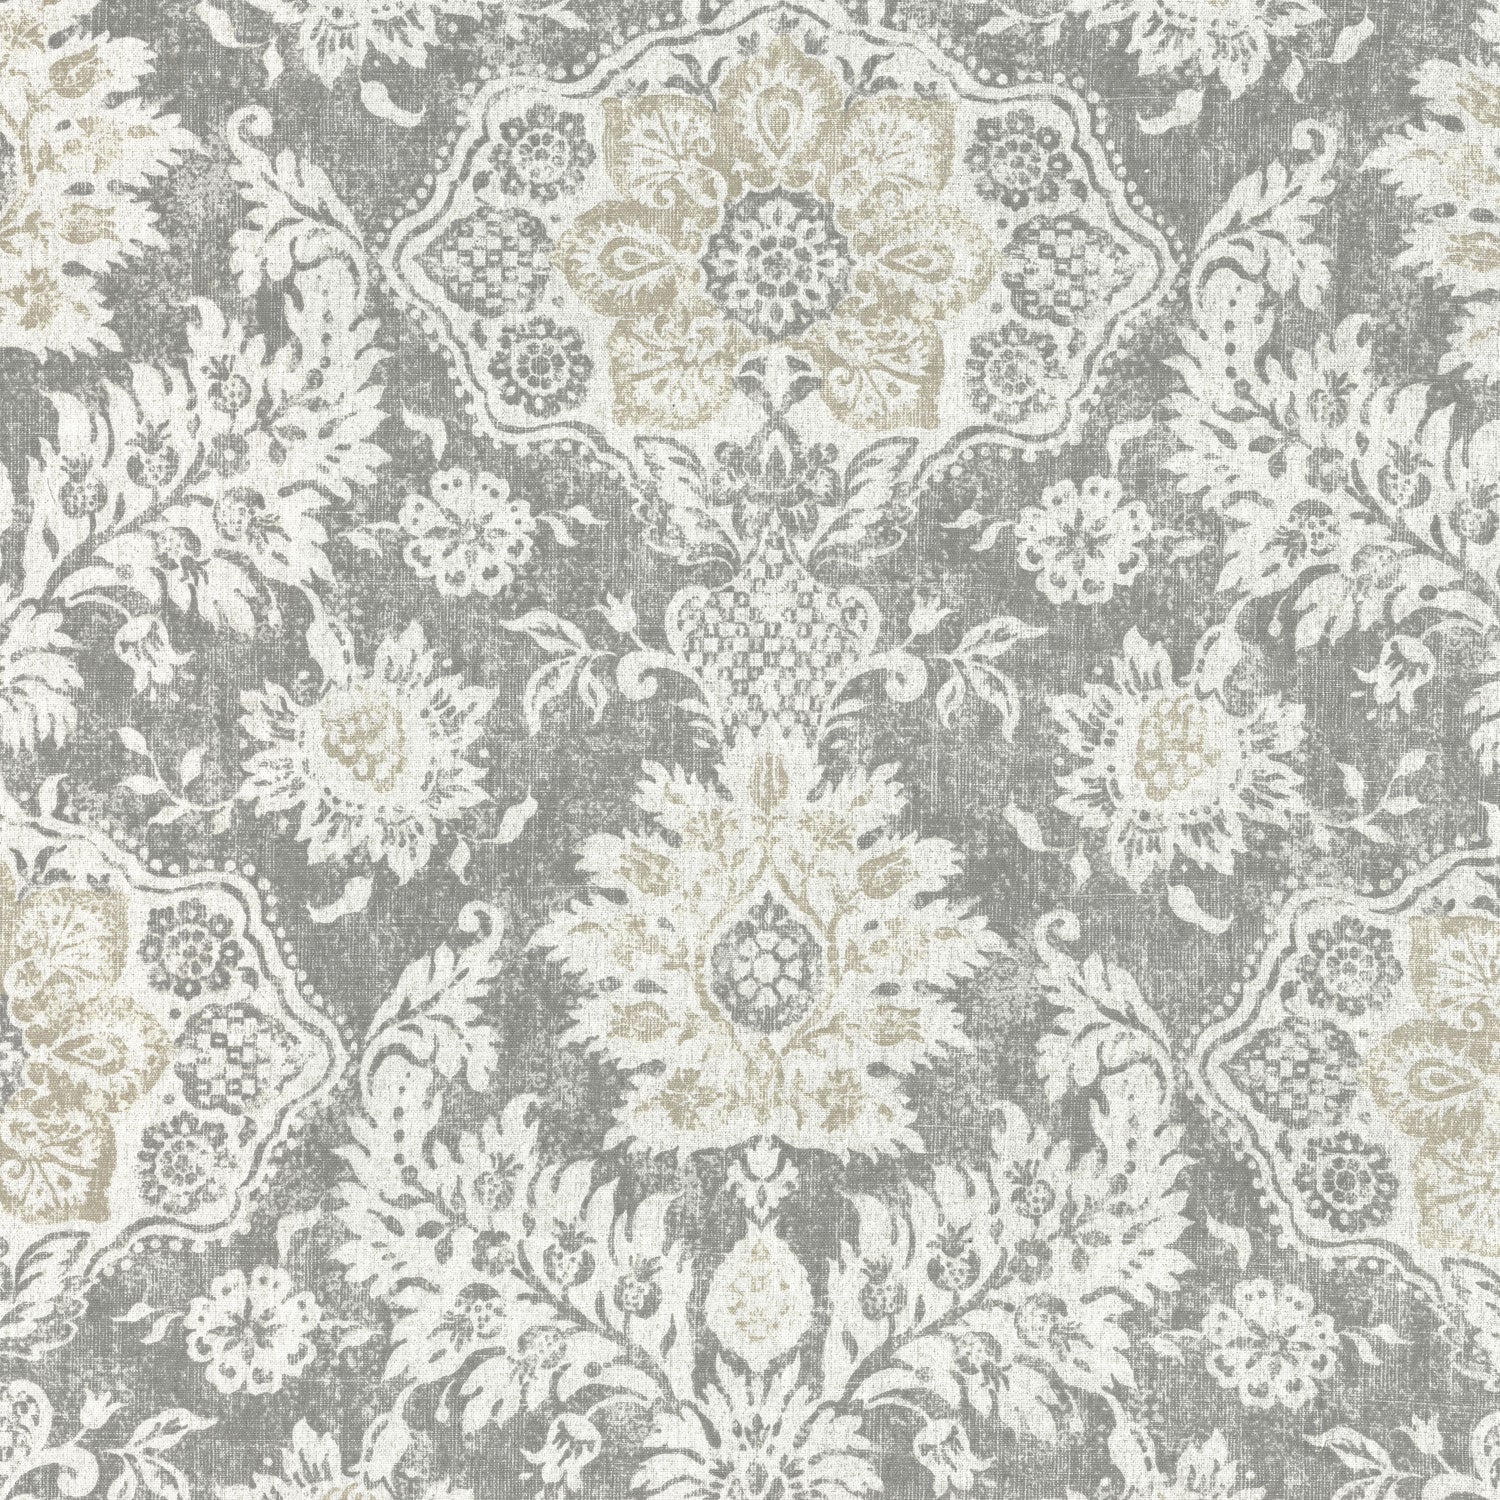 tailored valance in belmont mist pale gray floral damask